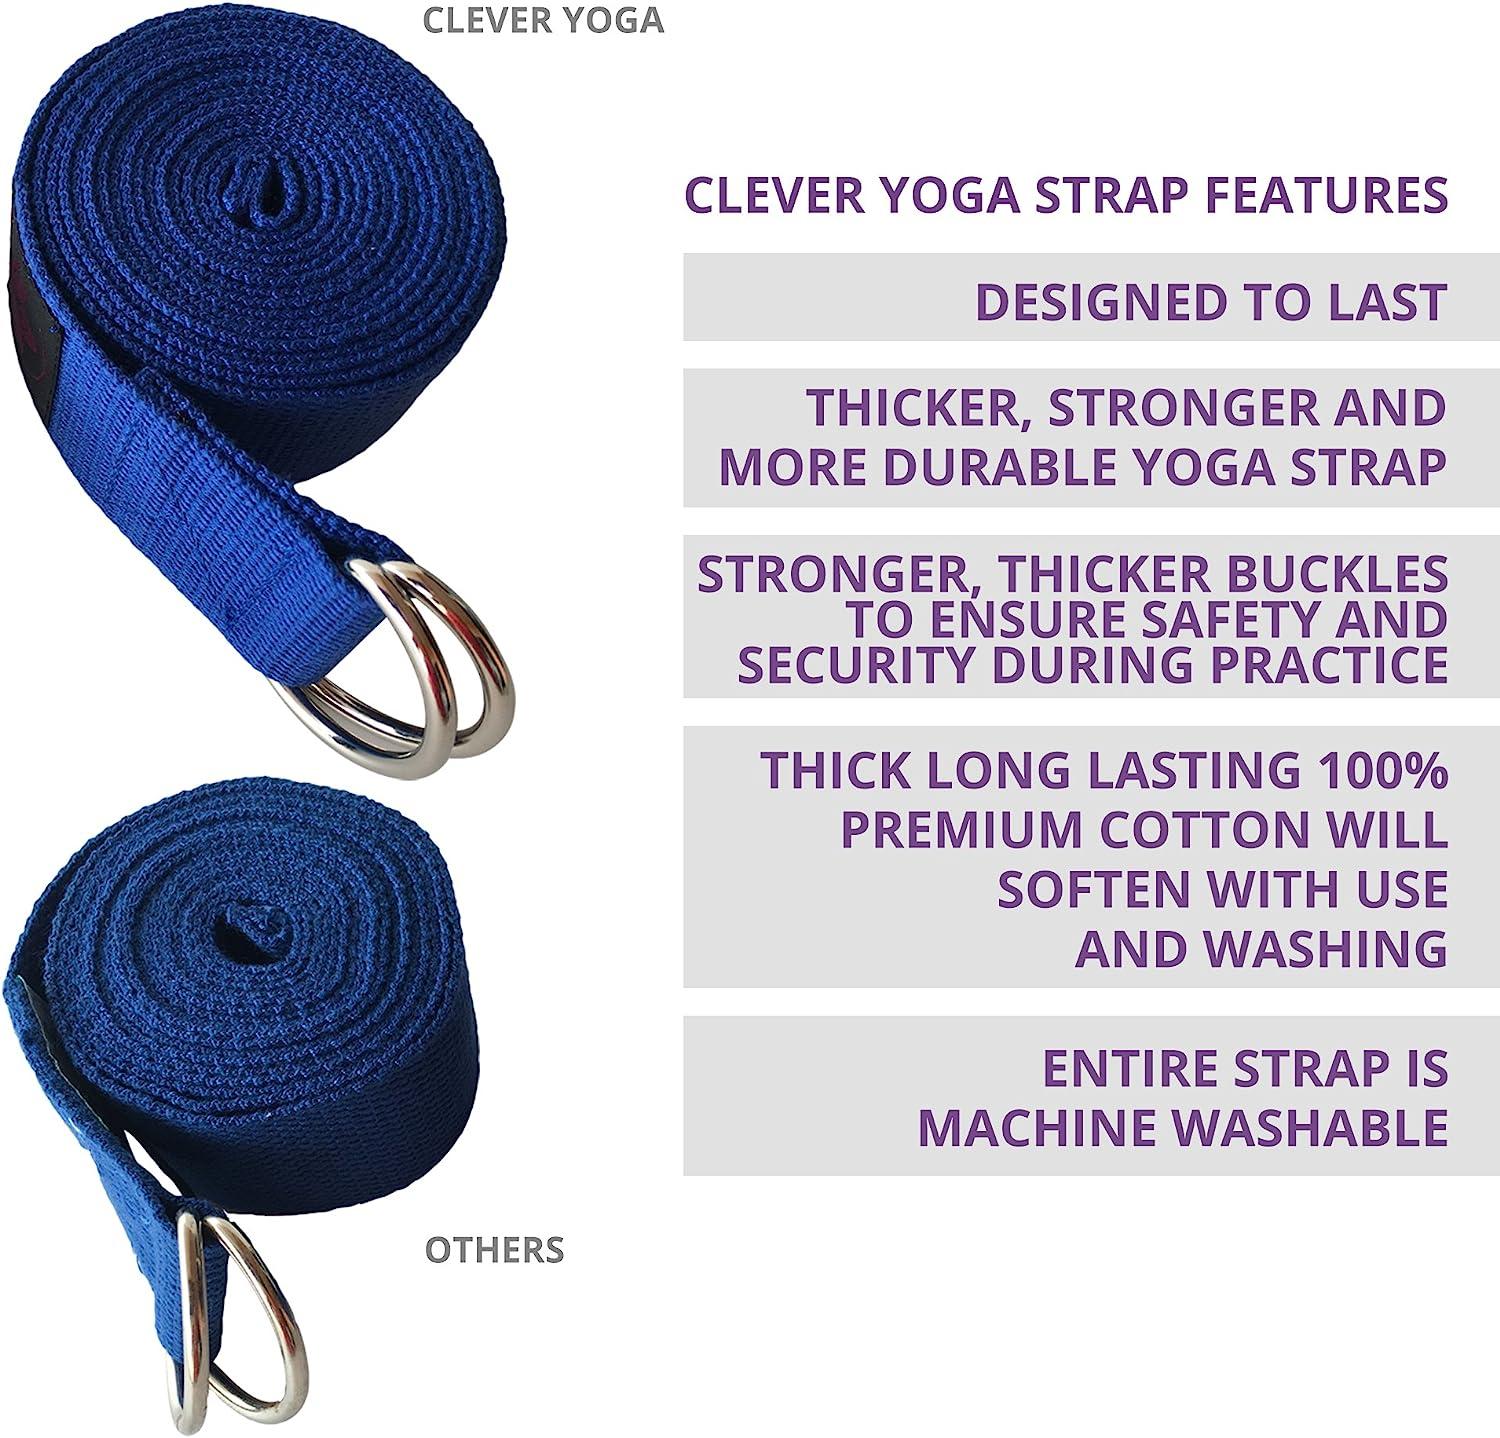 Clever Yoga Strap for Stretching Yoga Straps in Standard 8 Foot or